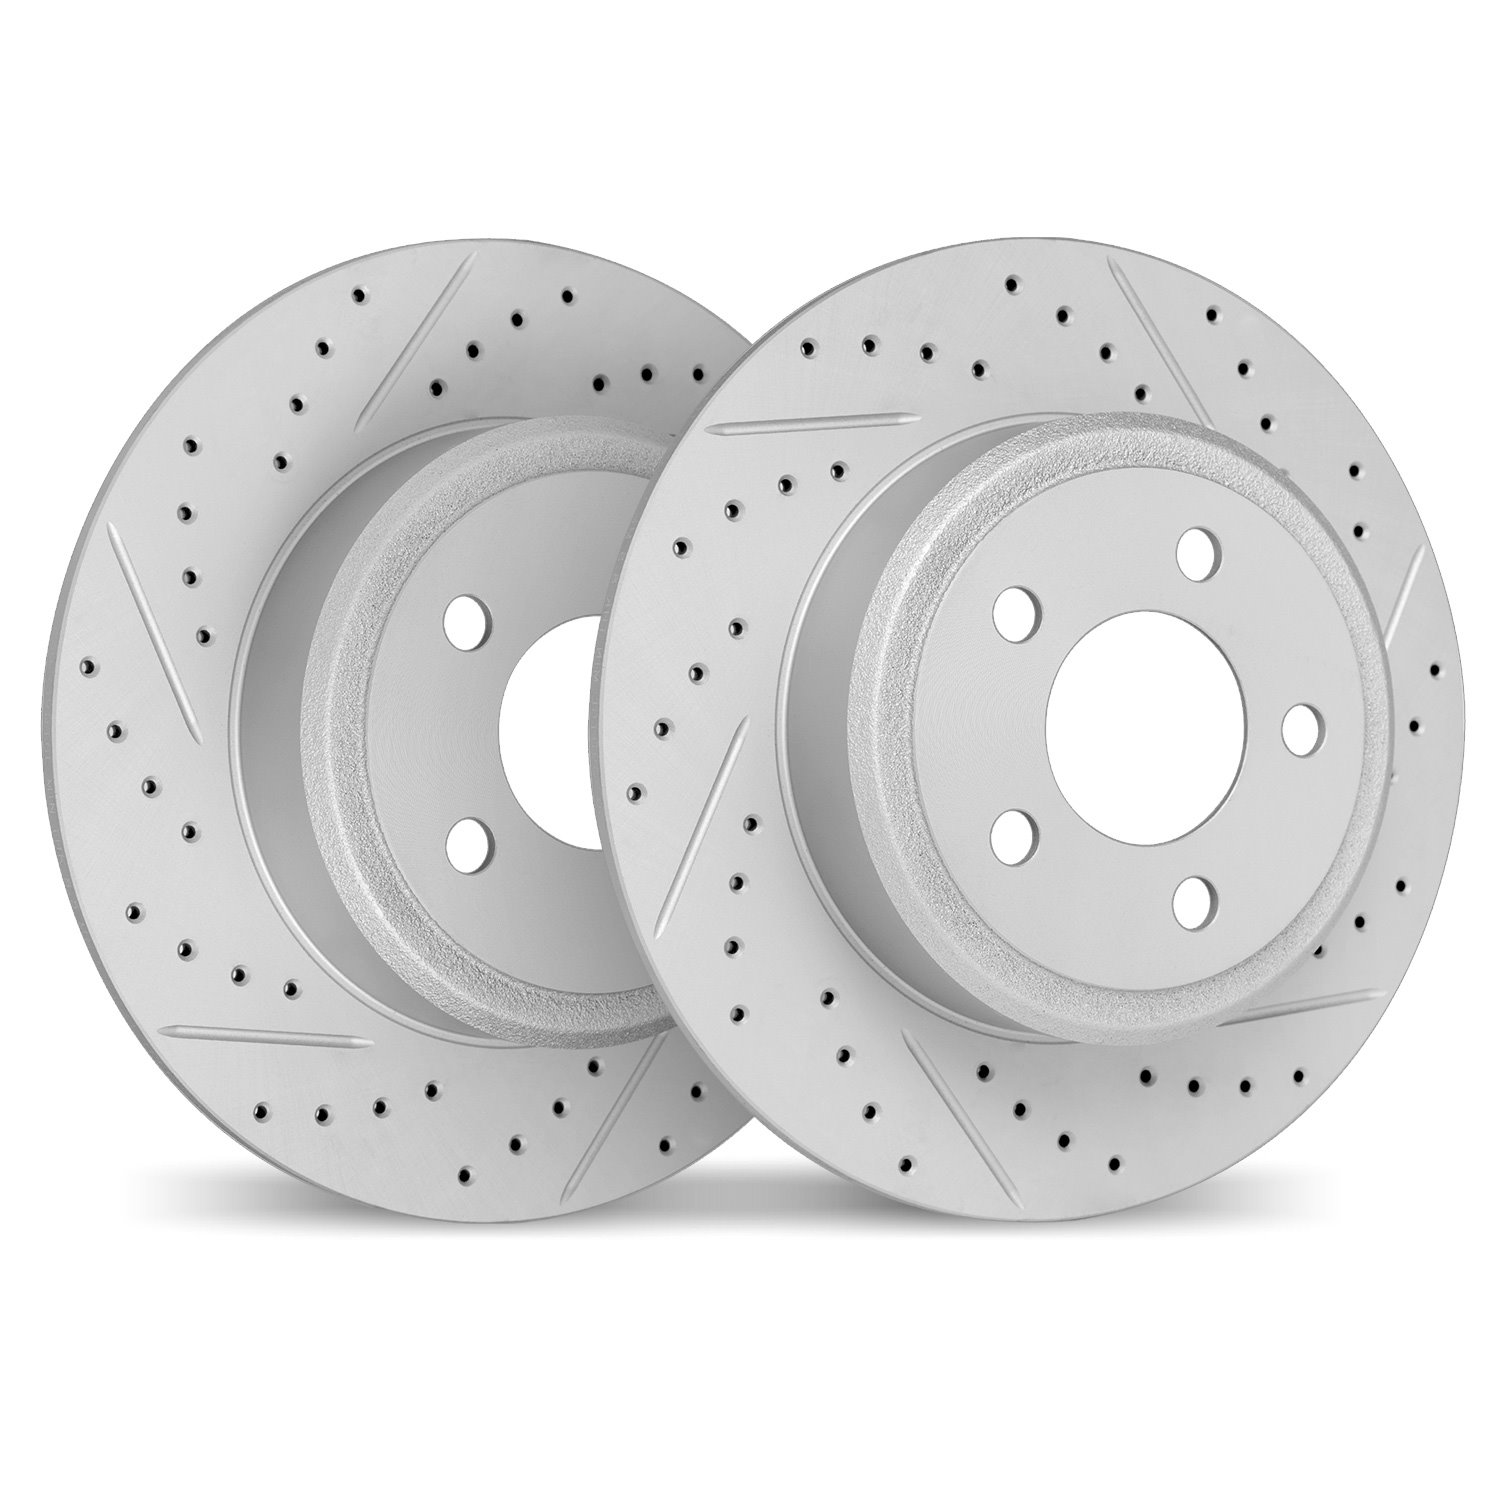 2002-76068 Geoperformance Drilled/Slotted Brake Rotors, 2009-2015 Lexus/Toyota/Scion, Position: Rear